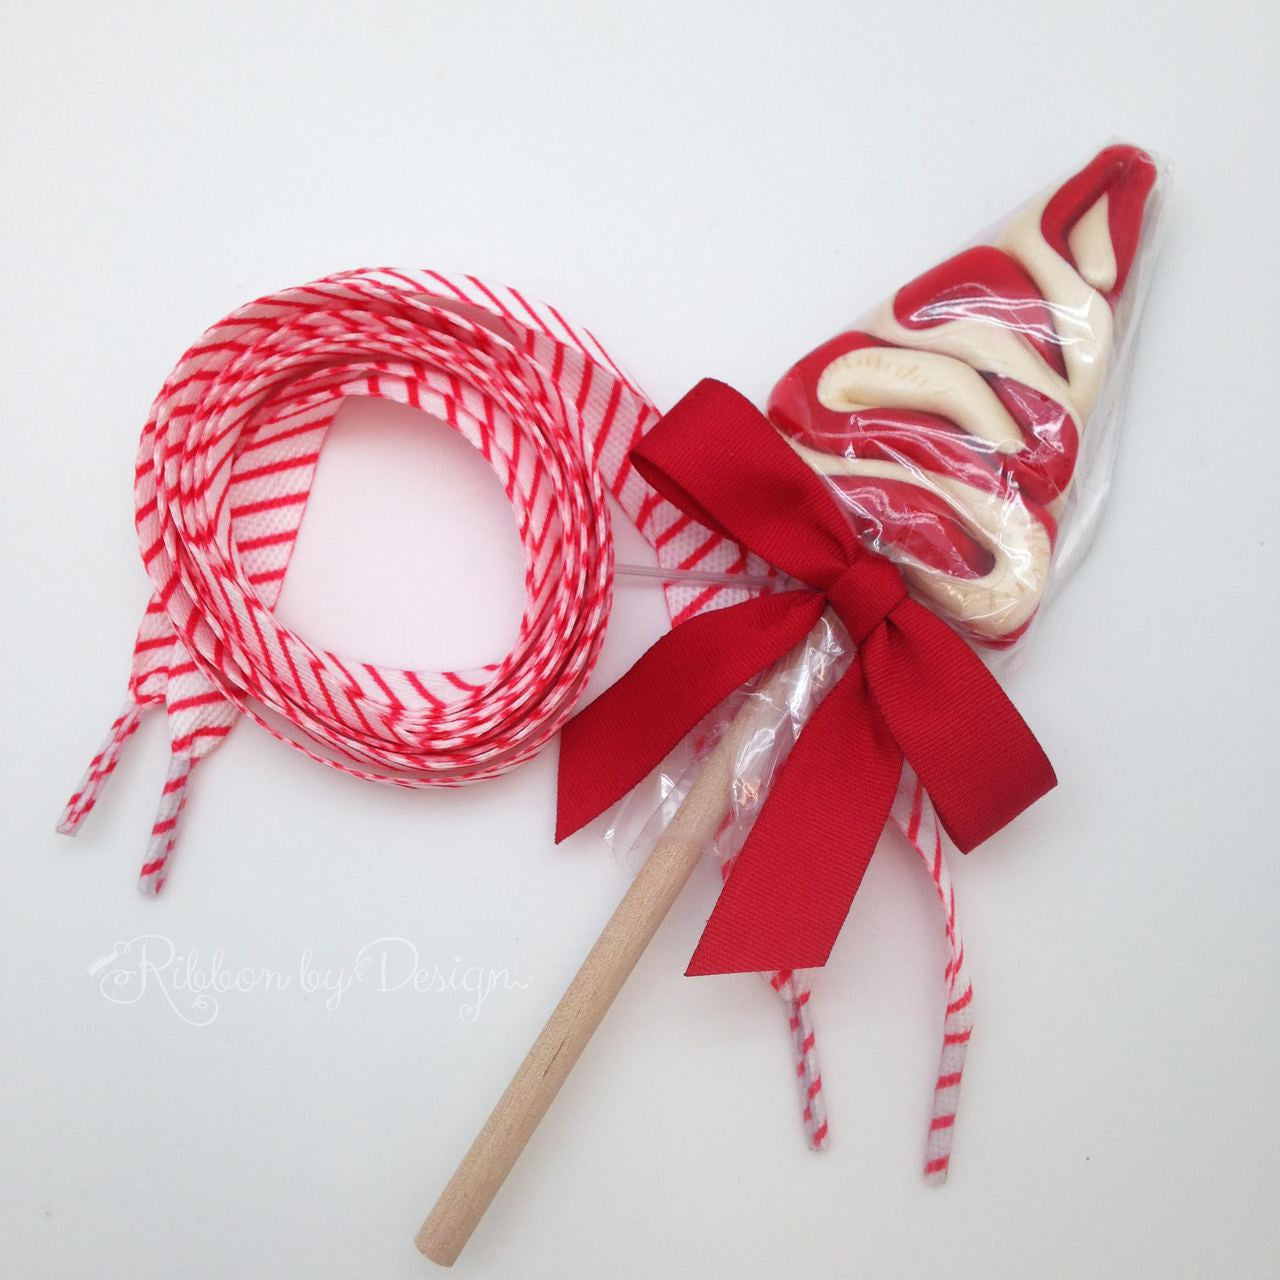 Our fun red and white striped shoelaces are ideal for celebrating and making some Holiday cheer!